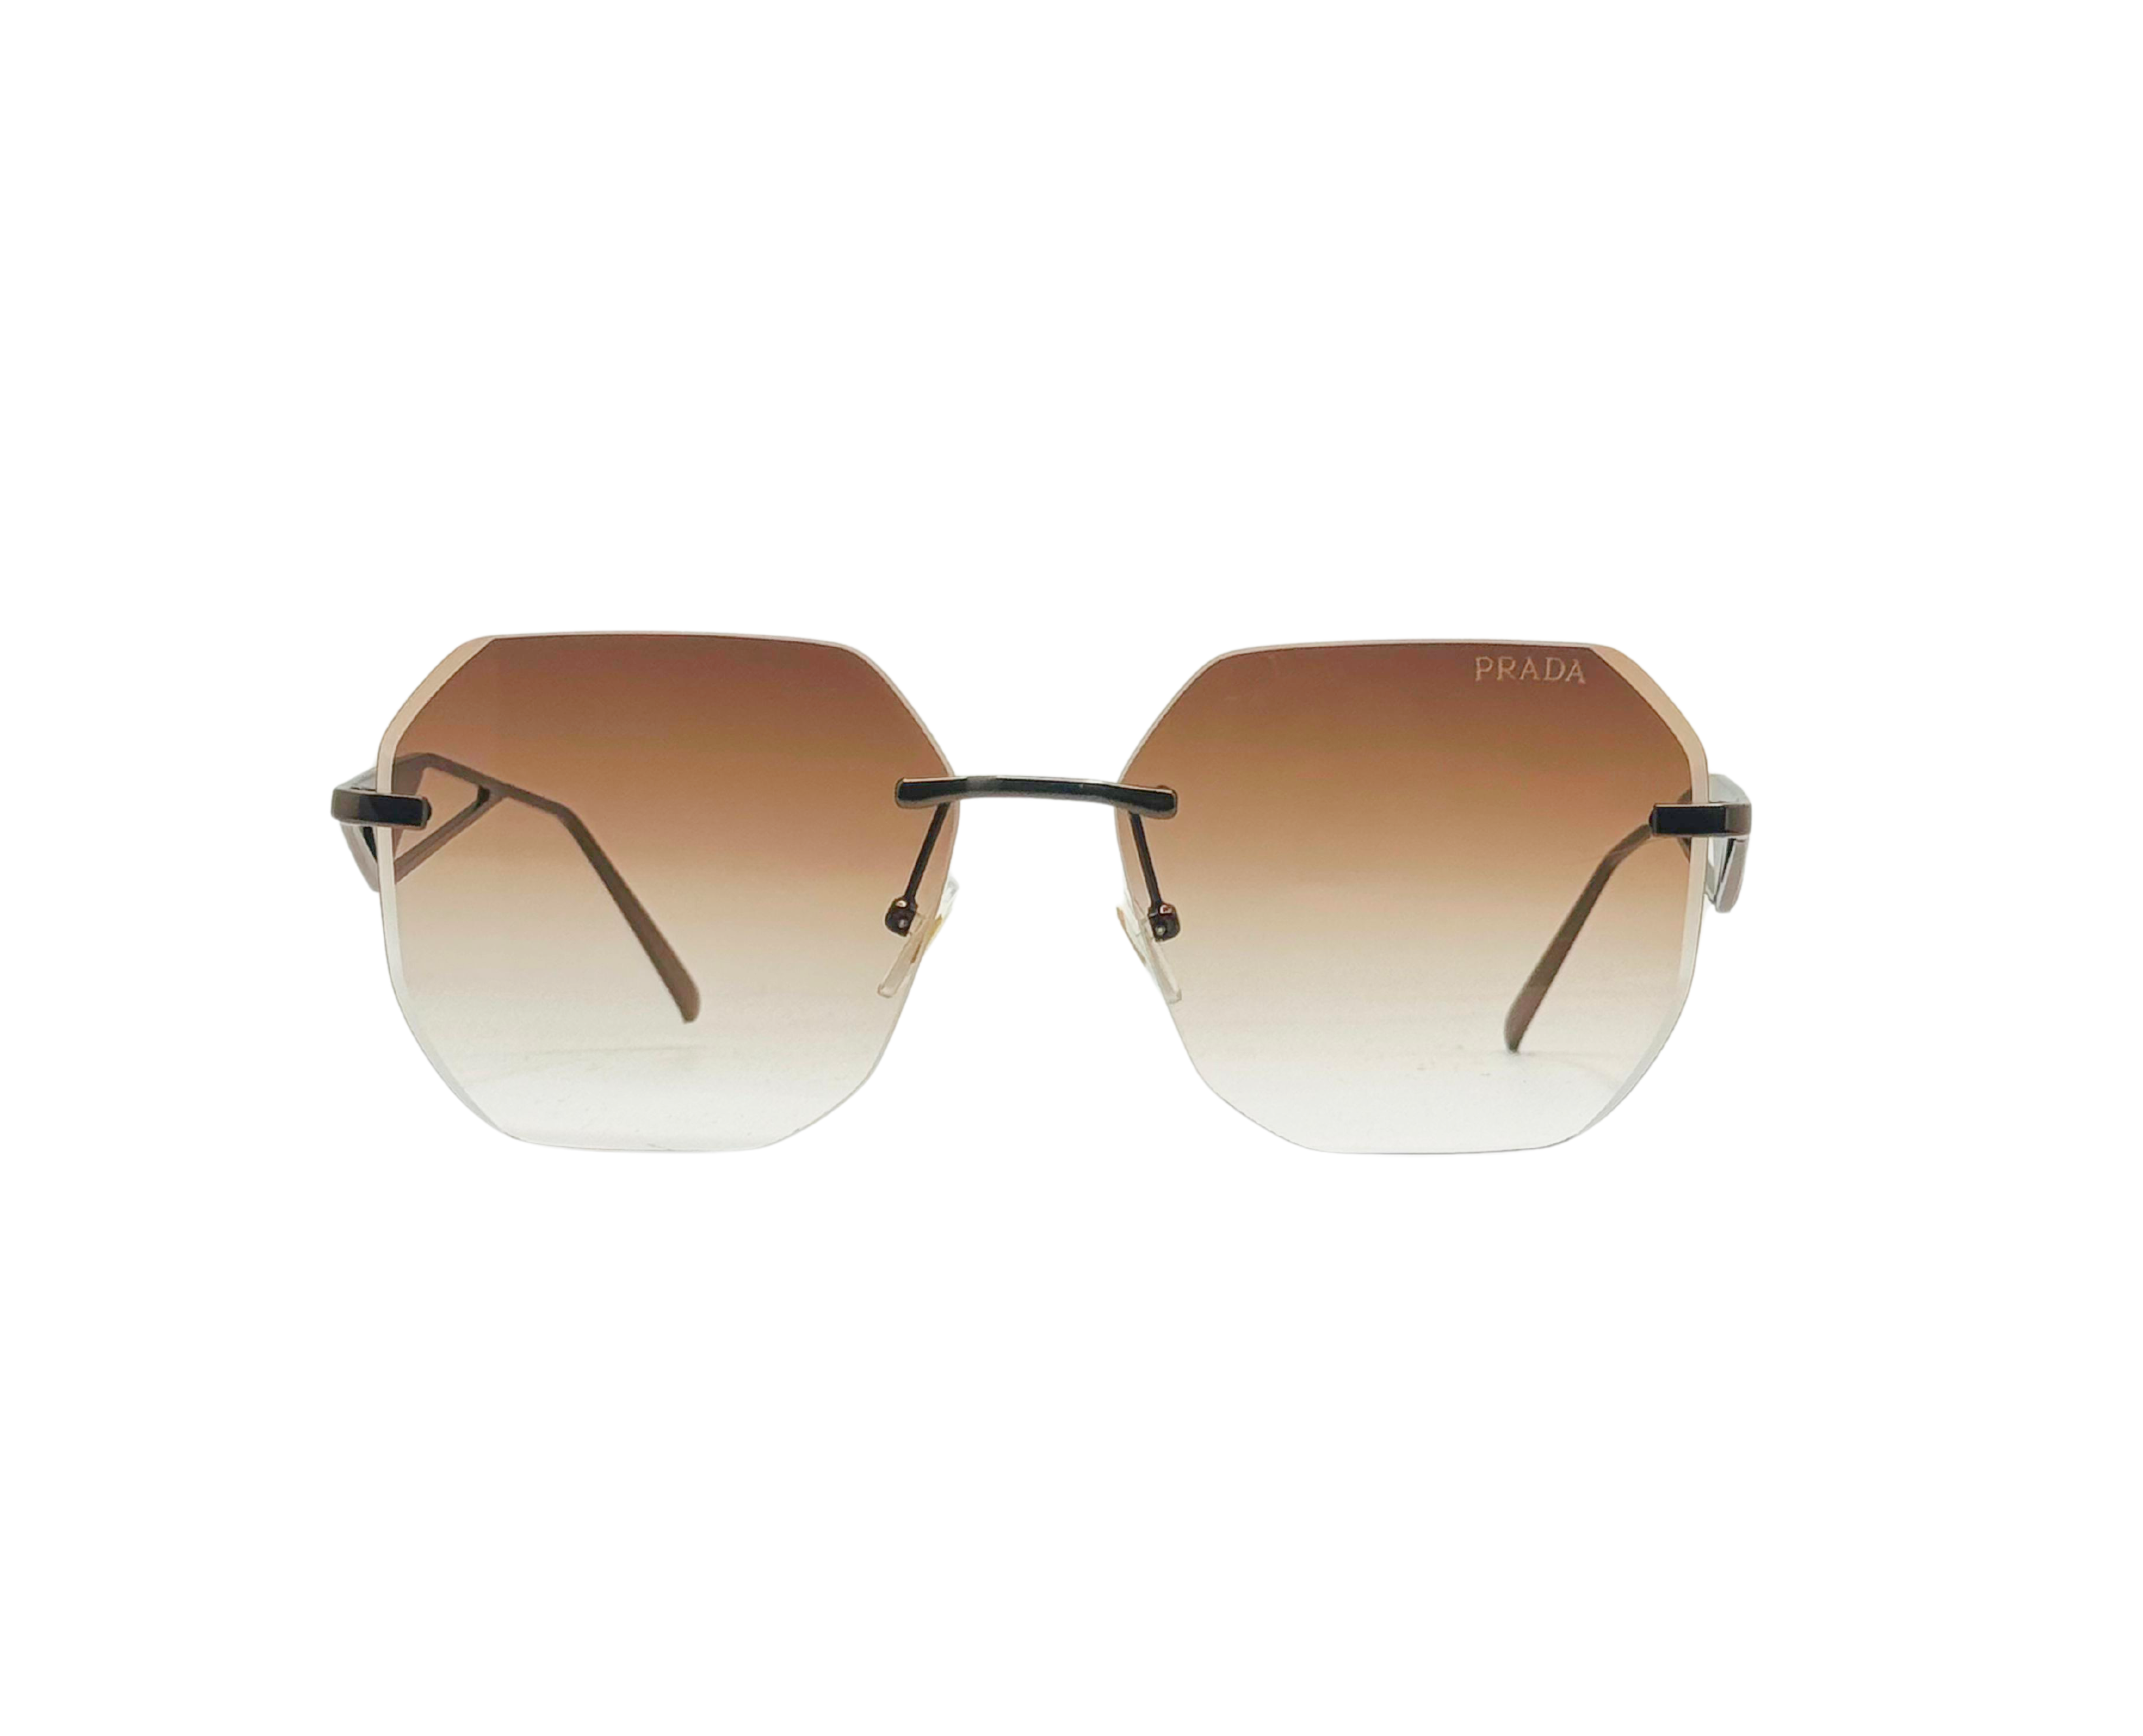 NS Deluxe - 96053 - Rimless - Sunglasses